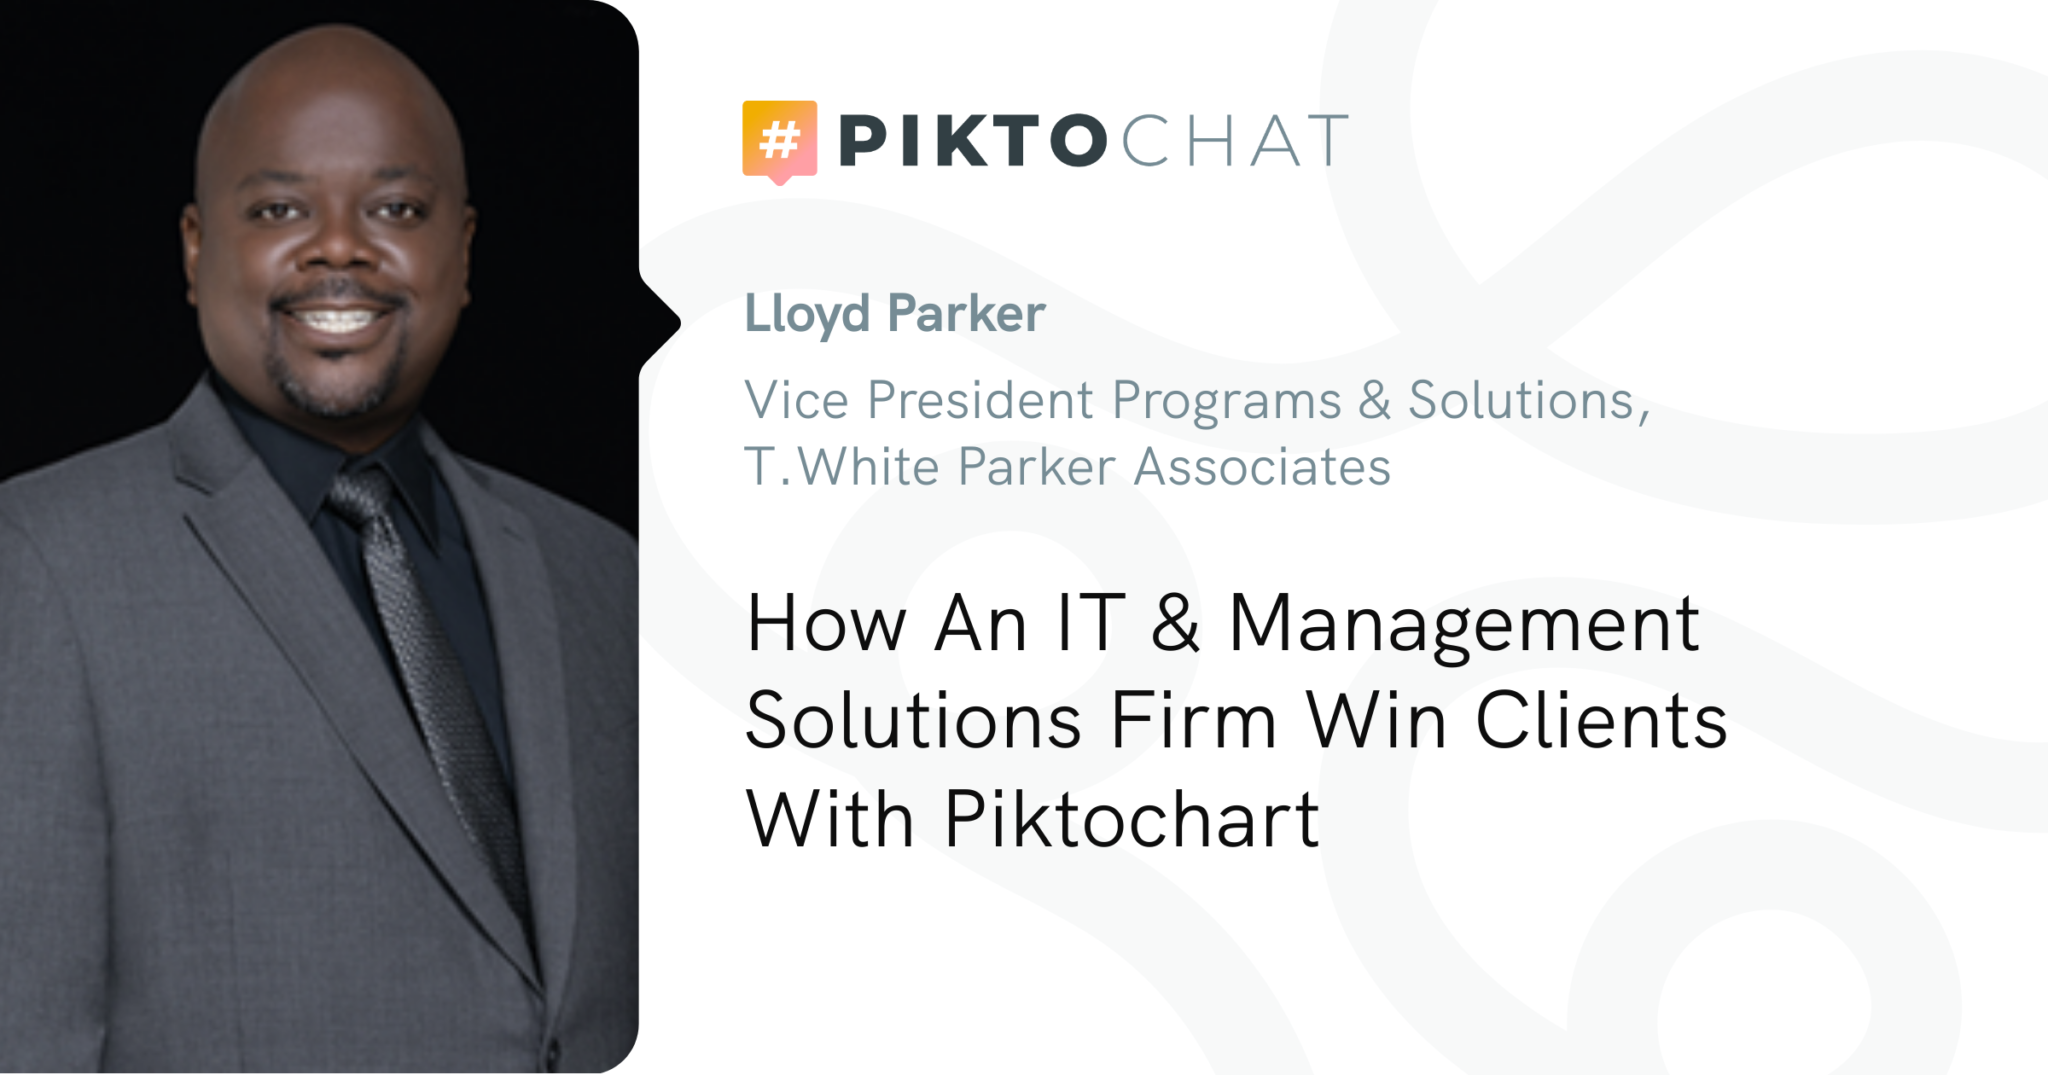 piktochat with lloyd parker